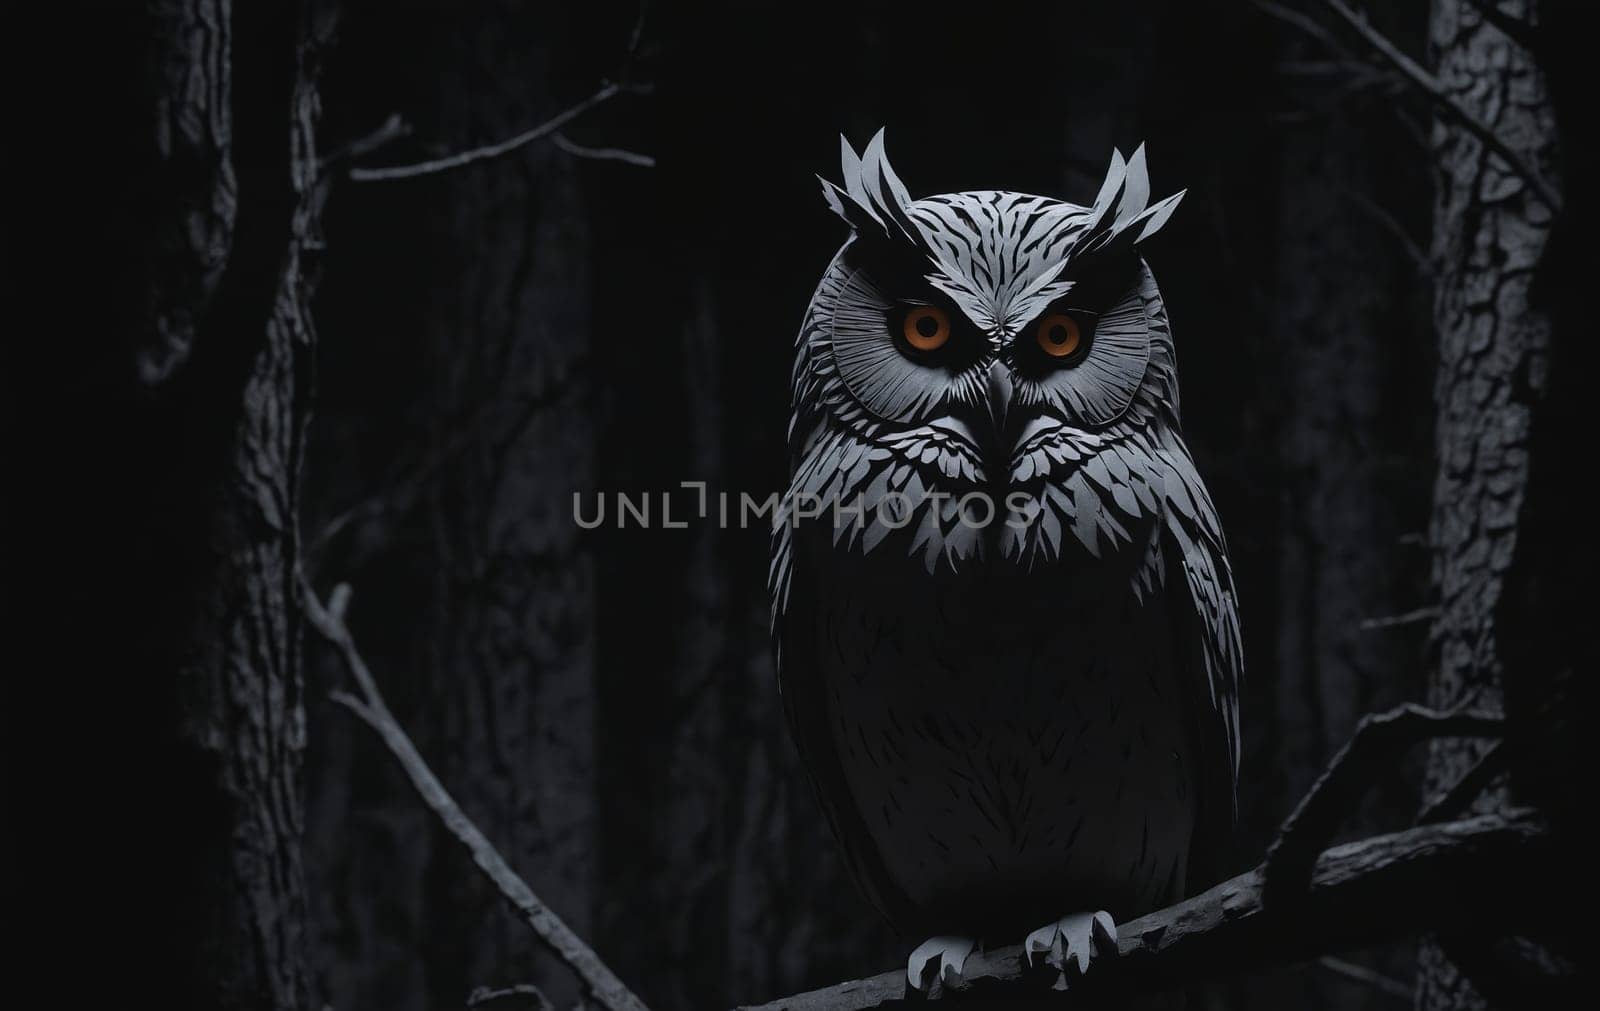 A carnivorous bird with grey feathers, an owl is perched on a tree branch in the dark, scanning the surroundings with its sharp beak and whiskers